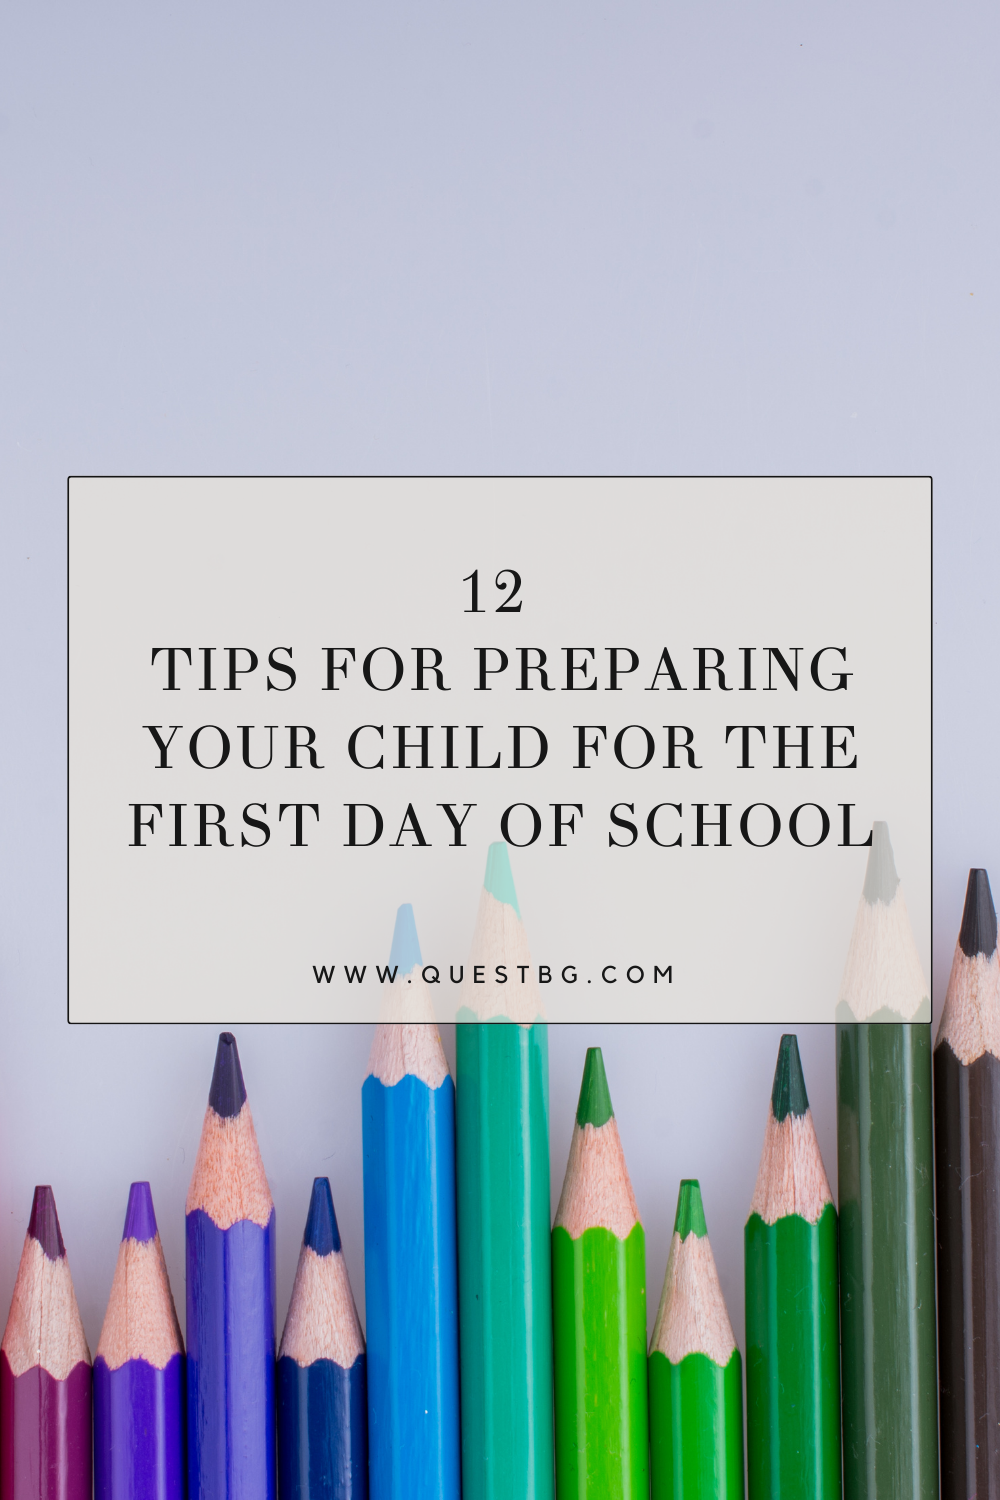 12 Tips for Preparing Your Child for the First Day of School